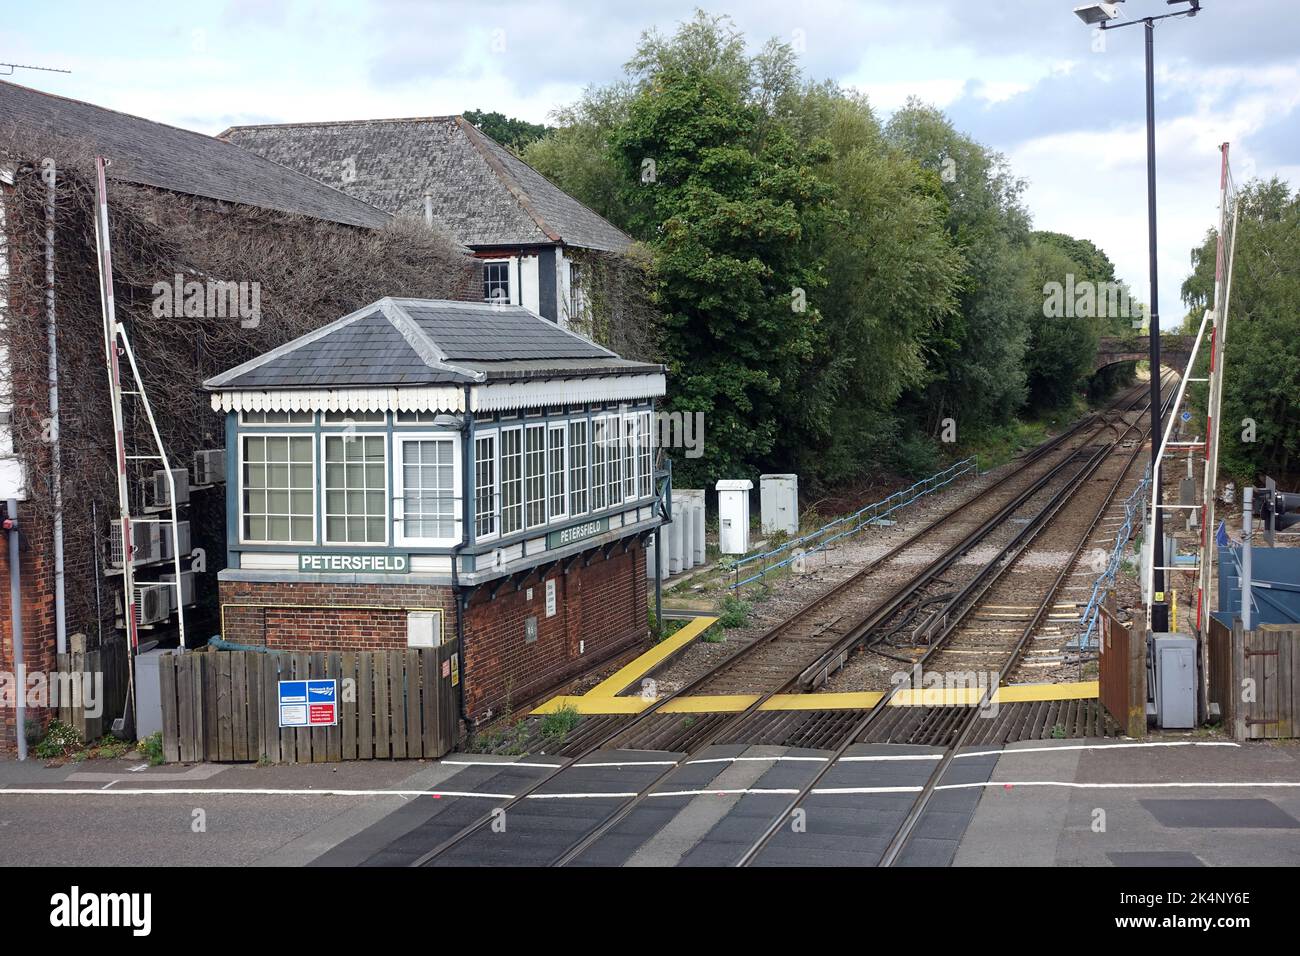 View of the signal box and level crossing at Petersfield railway station in Hampshire UK Stock Photo